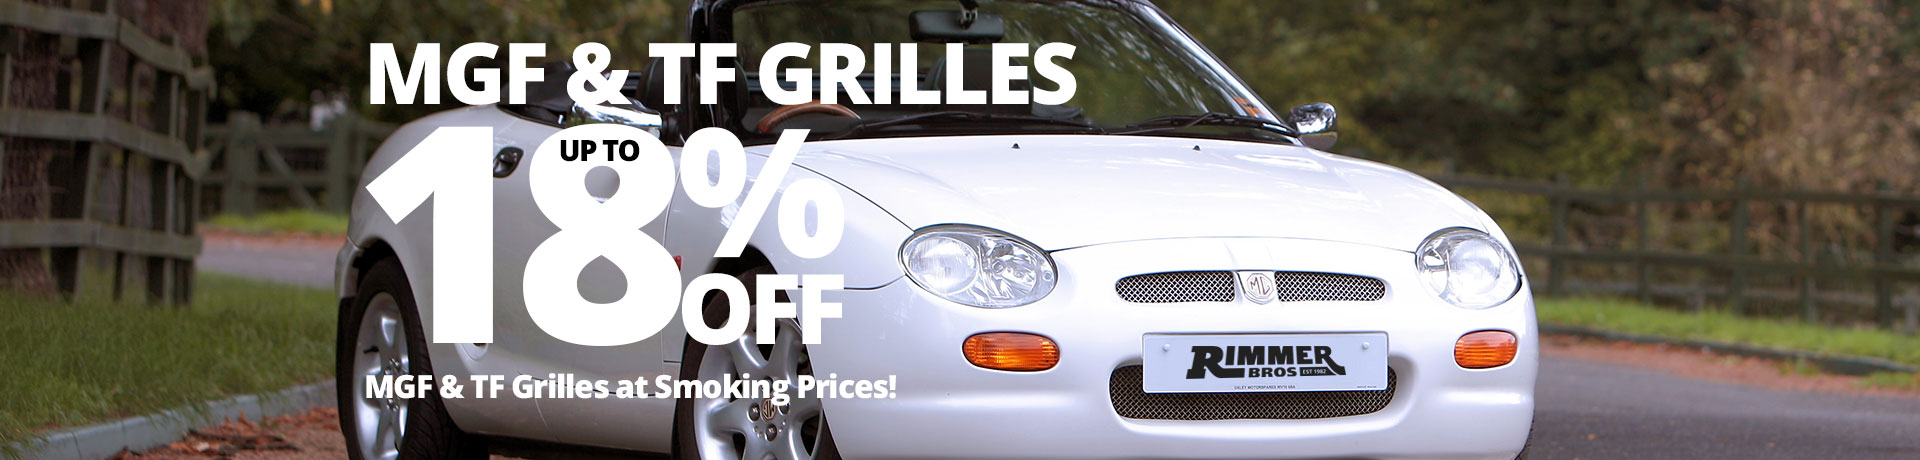 Up to 18% Off MGF & TF Grilles